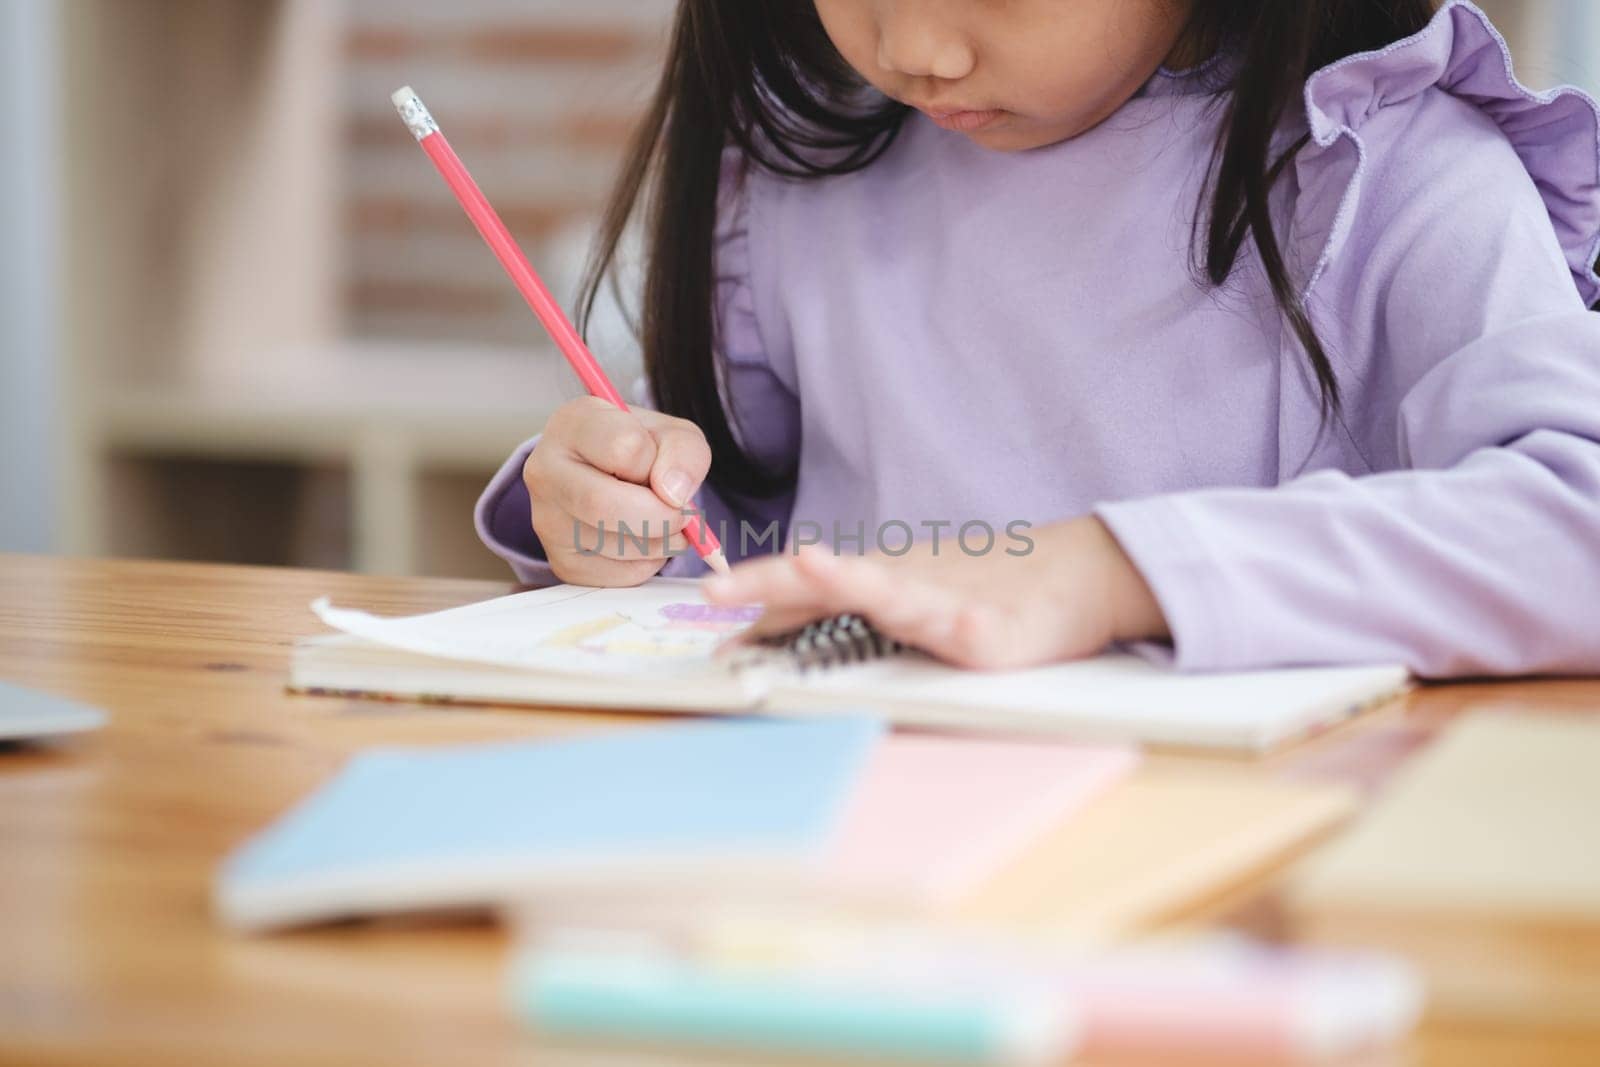 A young girl is writing with a red pencil on a piece of paper. She is sitting at a desk with a laptop and a stack of books nearby